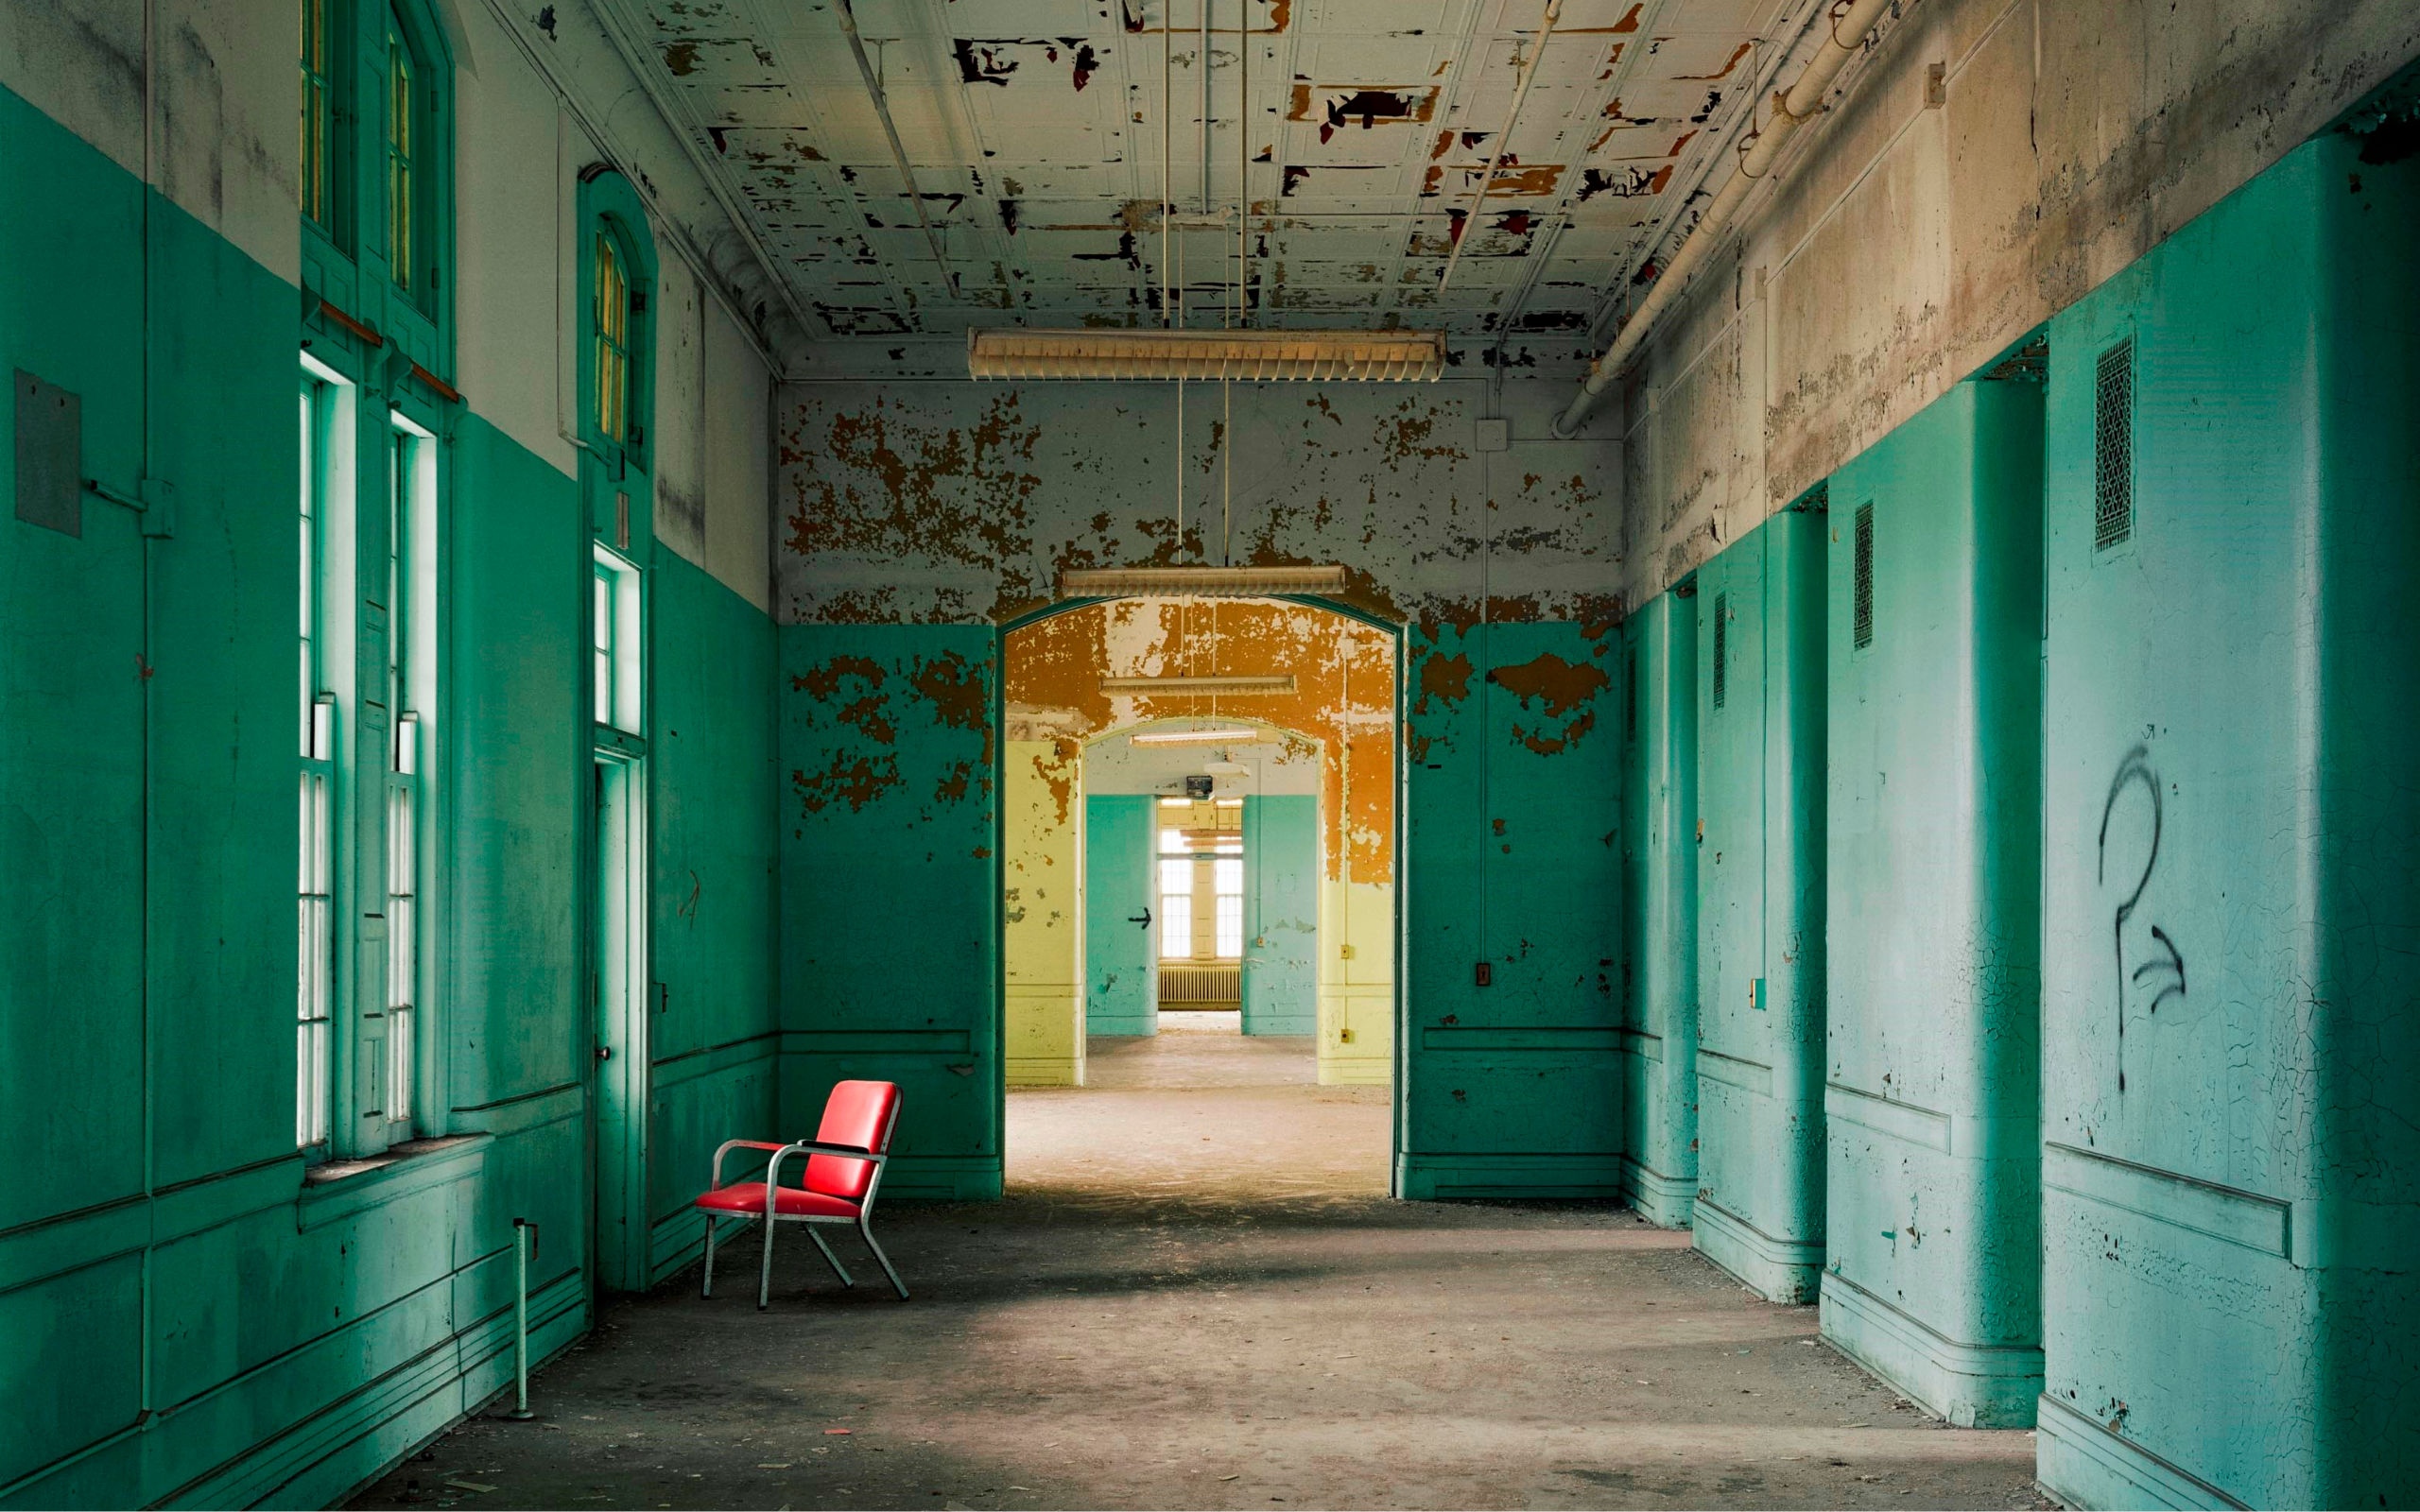 Derelict institutional hallway with peeling green paint and lone red chair in front of window.